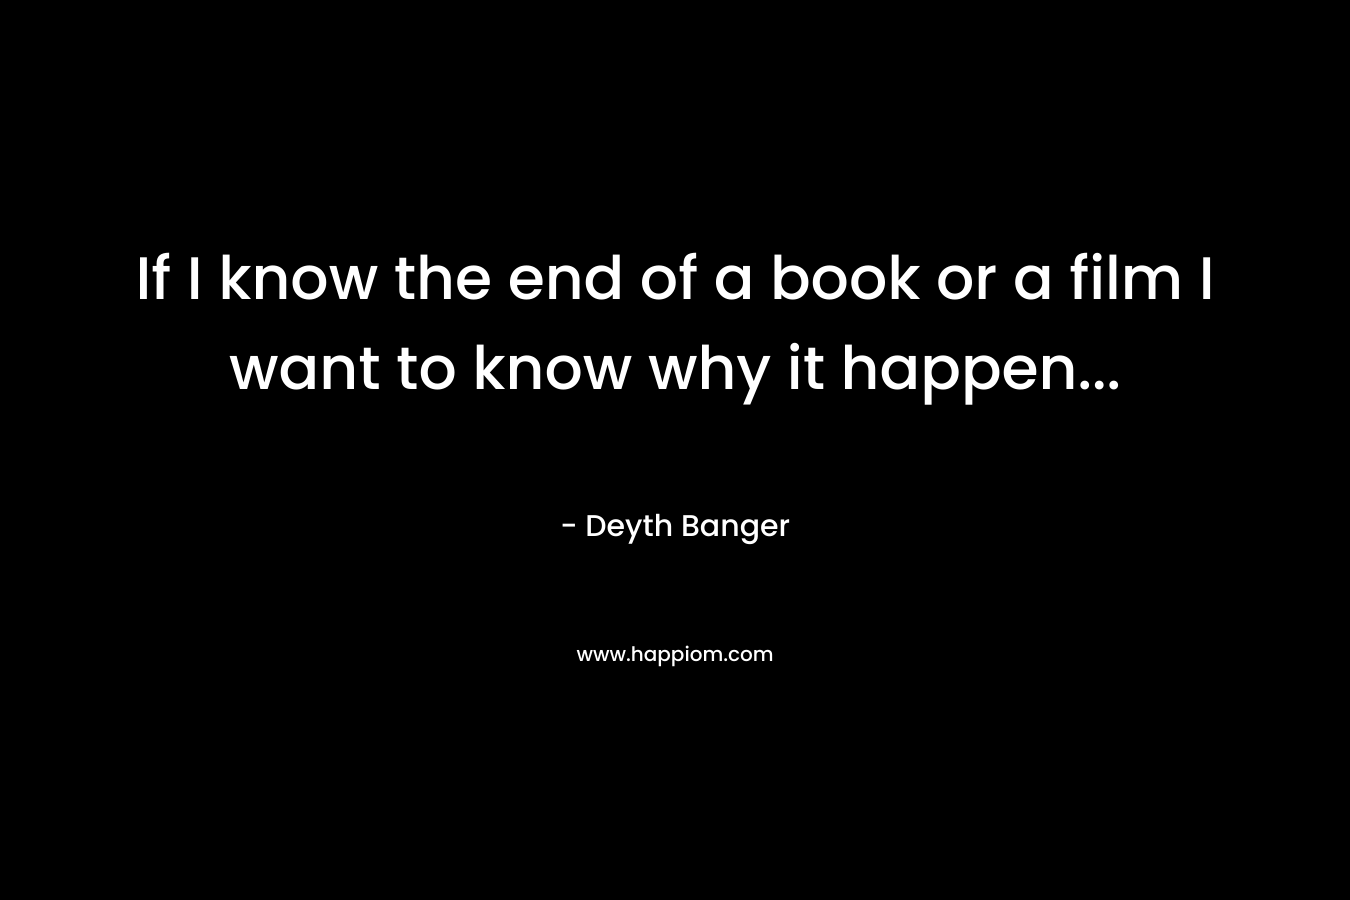 If I know the end of a book or a film I want to know why it happen...